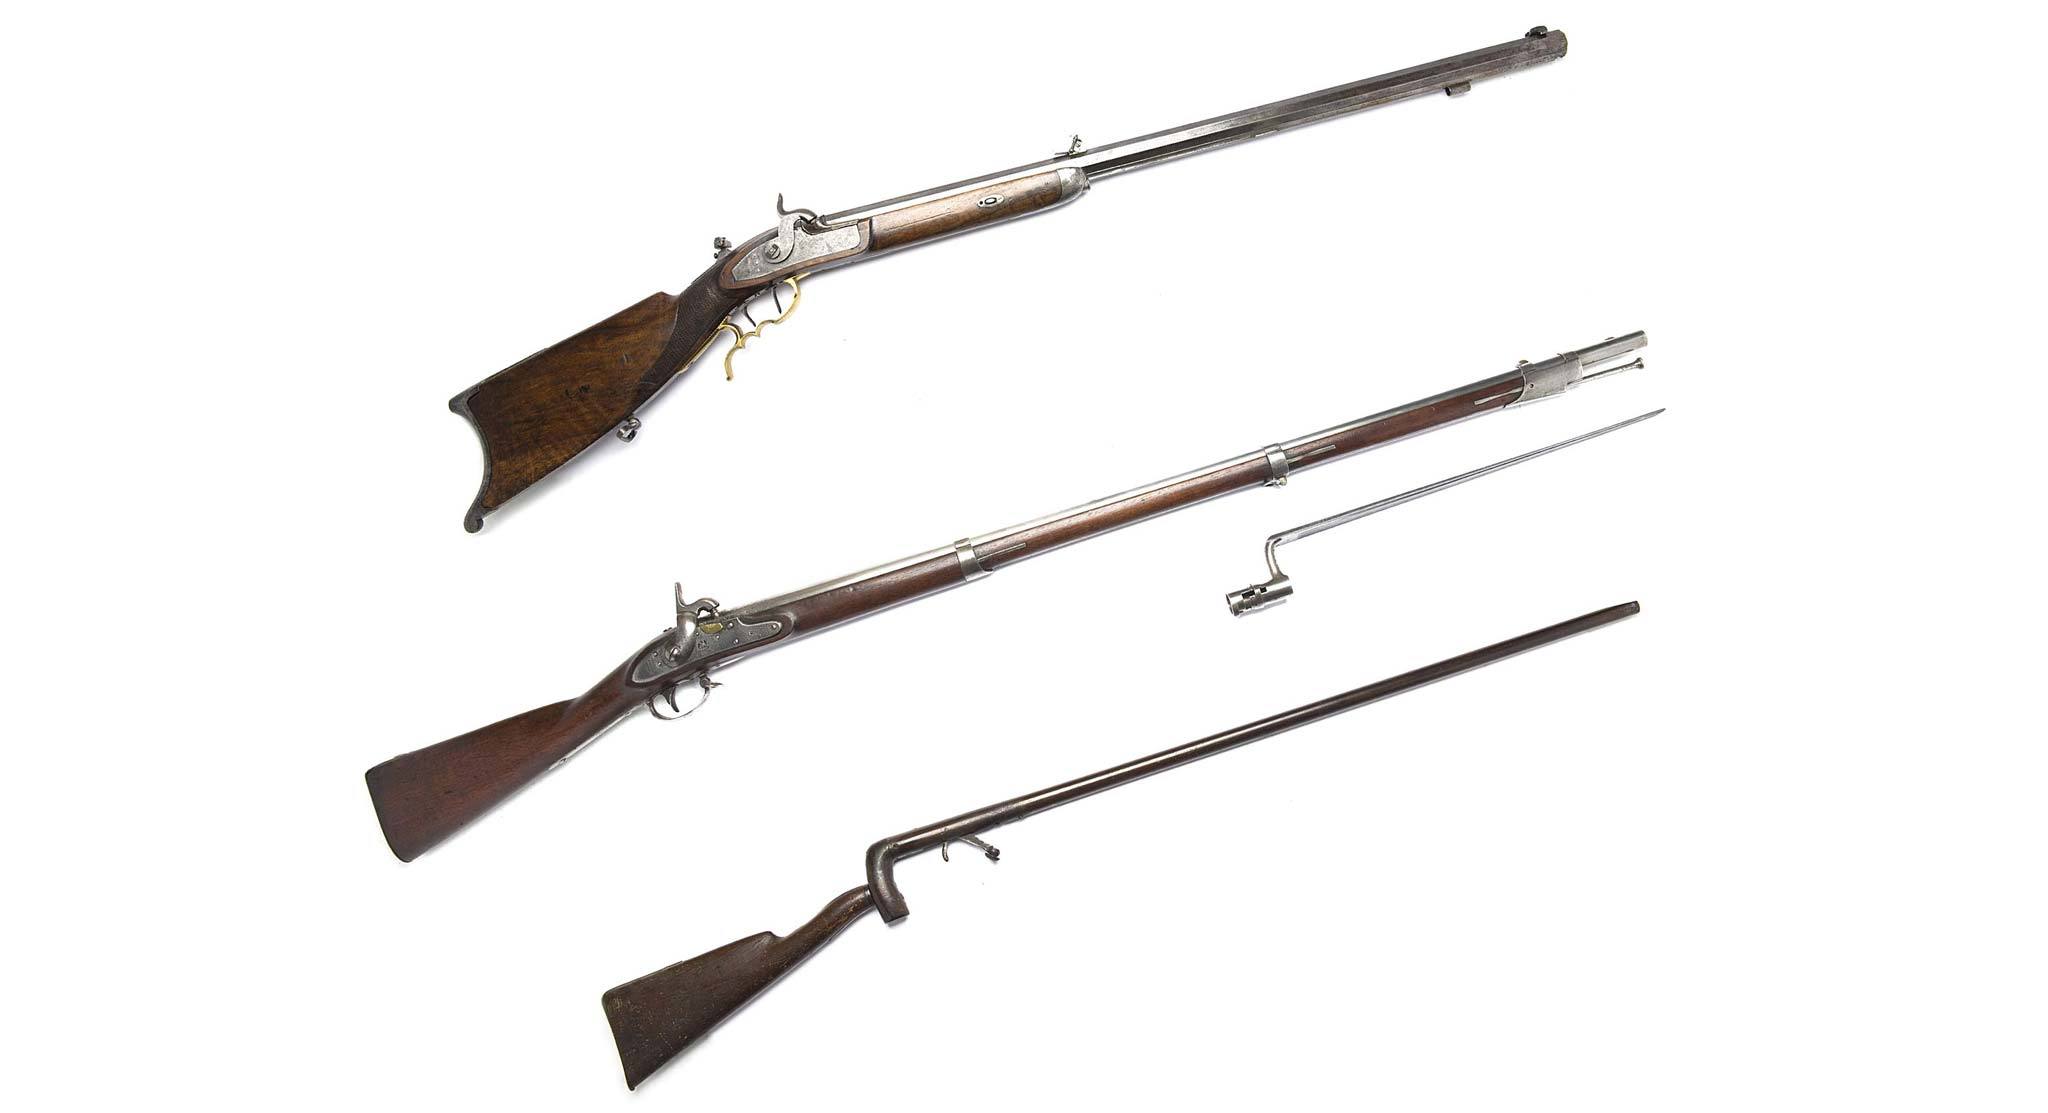 (From top to bottom) Target rifle: American, c. 1855; Springfield Model 1816 musket c. 1834; Cane (or “poacher’s”) gun with removable stock, c. 1827